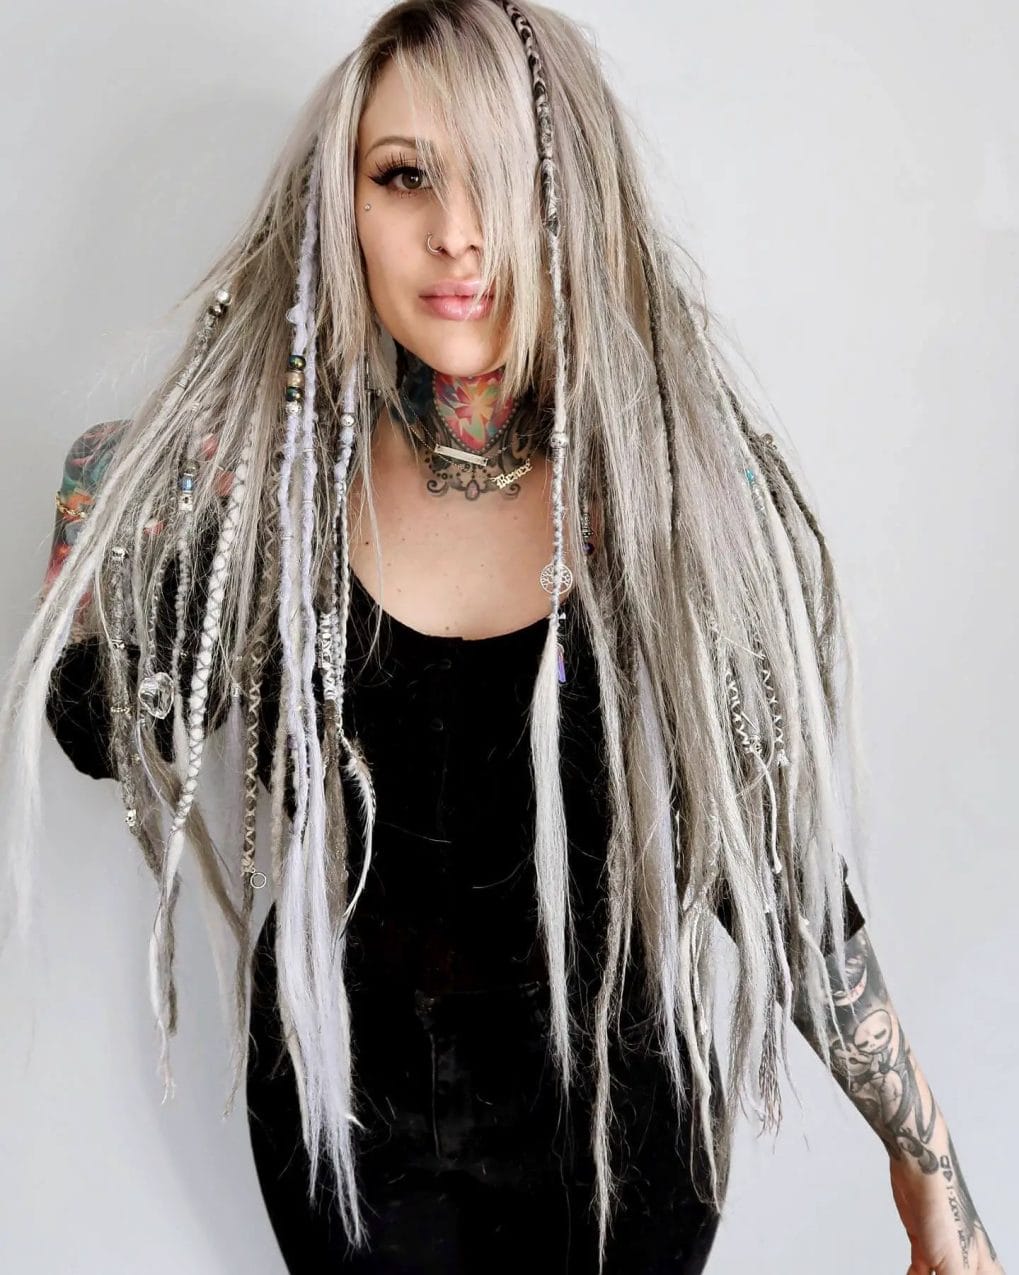 Silver ash base with textured synthetic dreadlocks and beads, paired with sleek bangs for an avant-garde festival style.